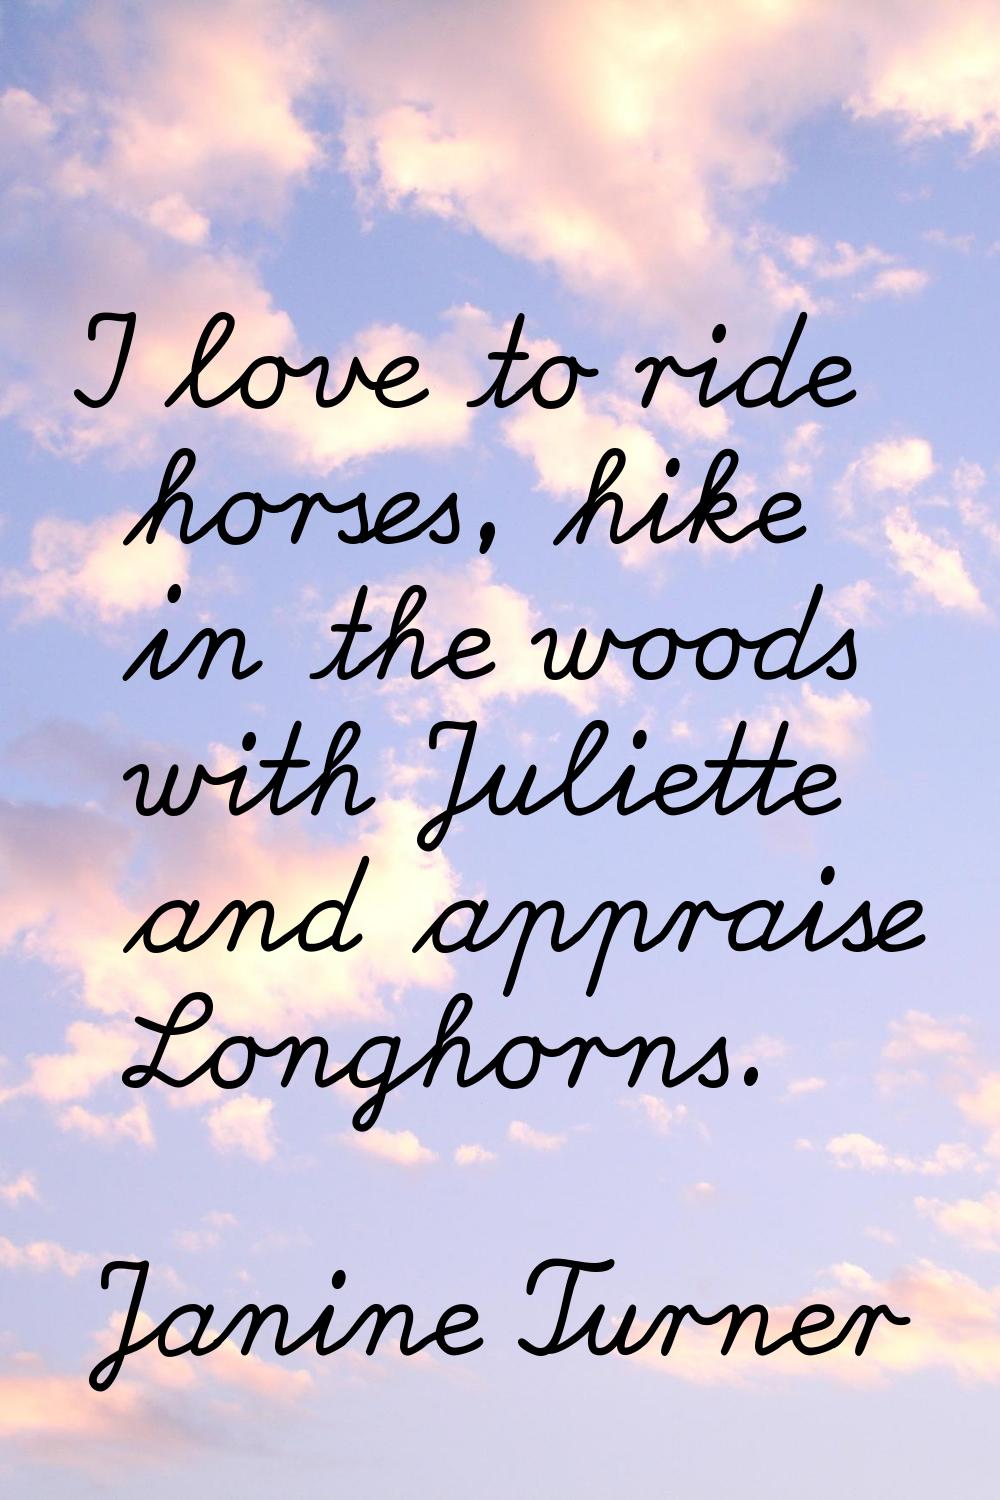 I love to ride horses, hike in the woods with Juliette and appraise Longhorns.